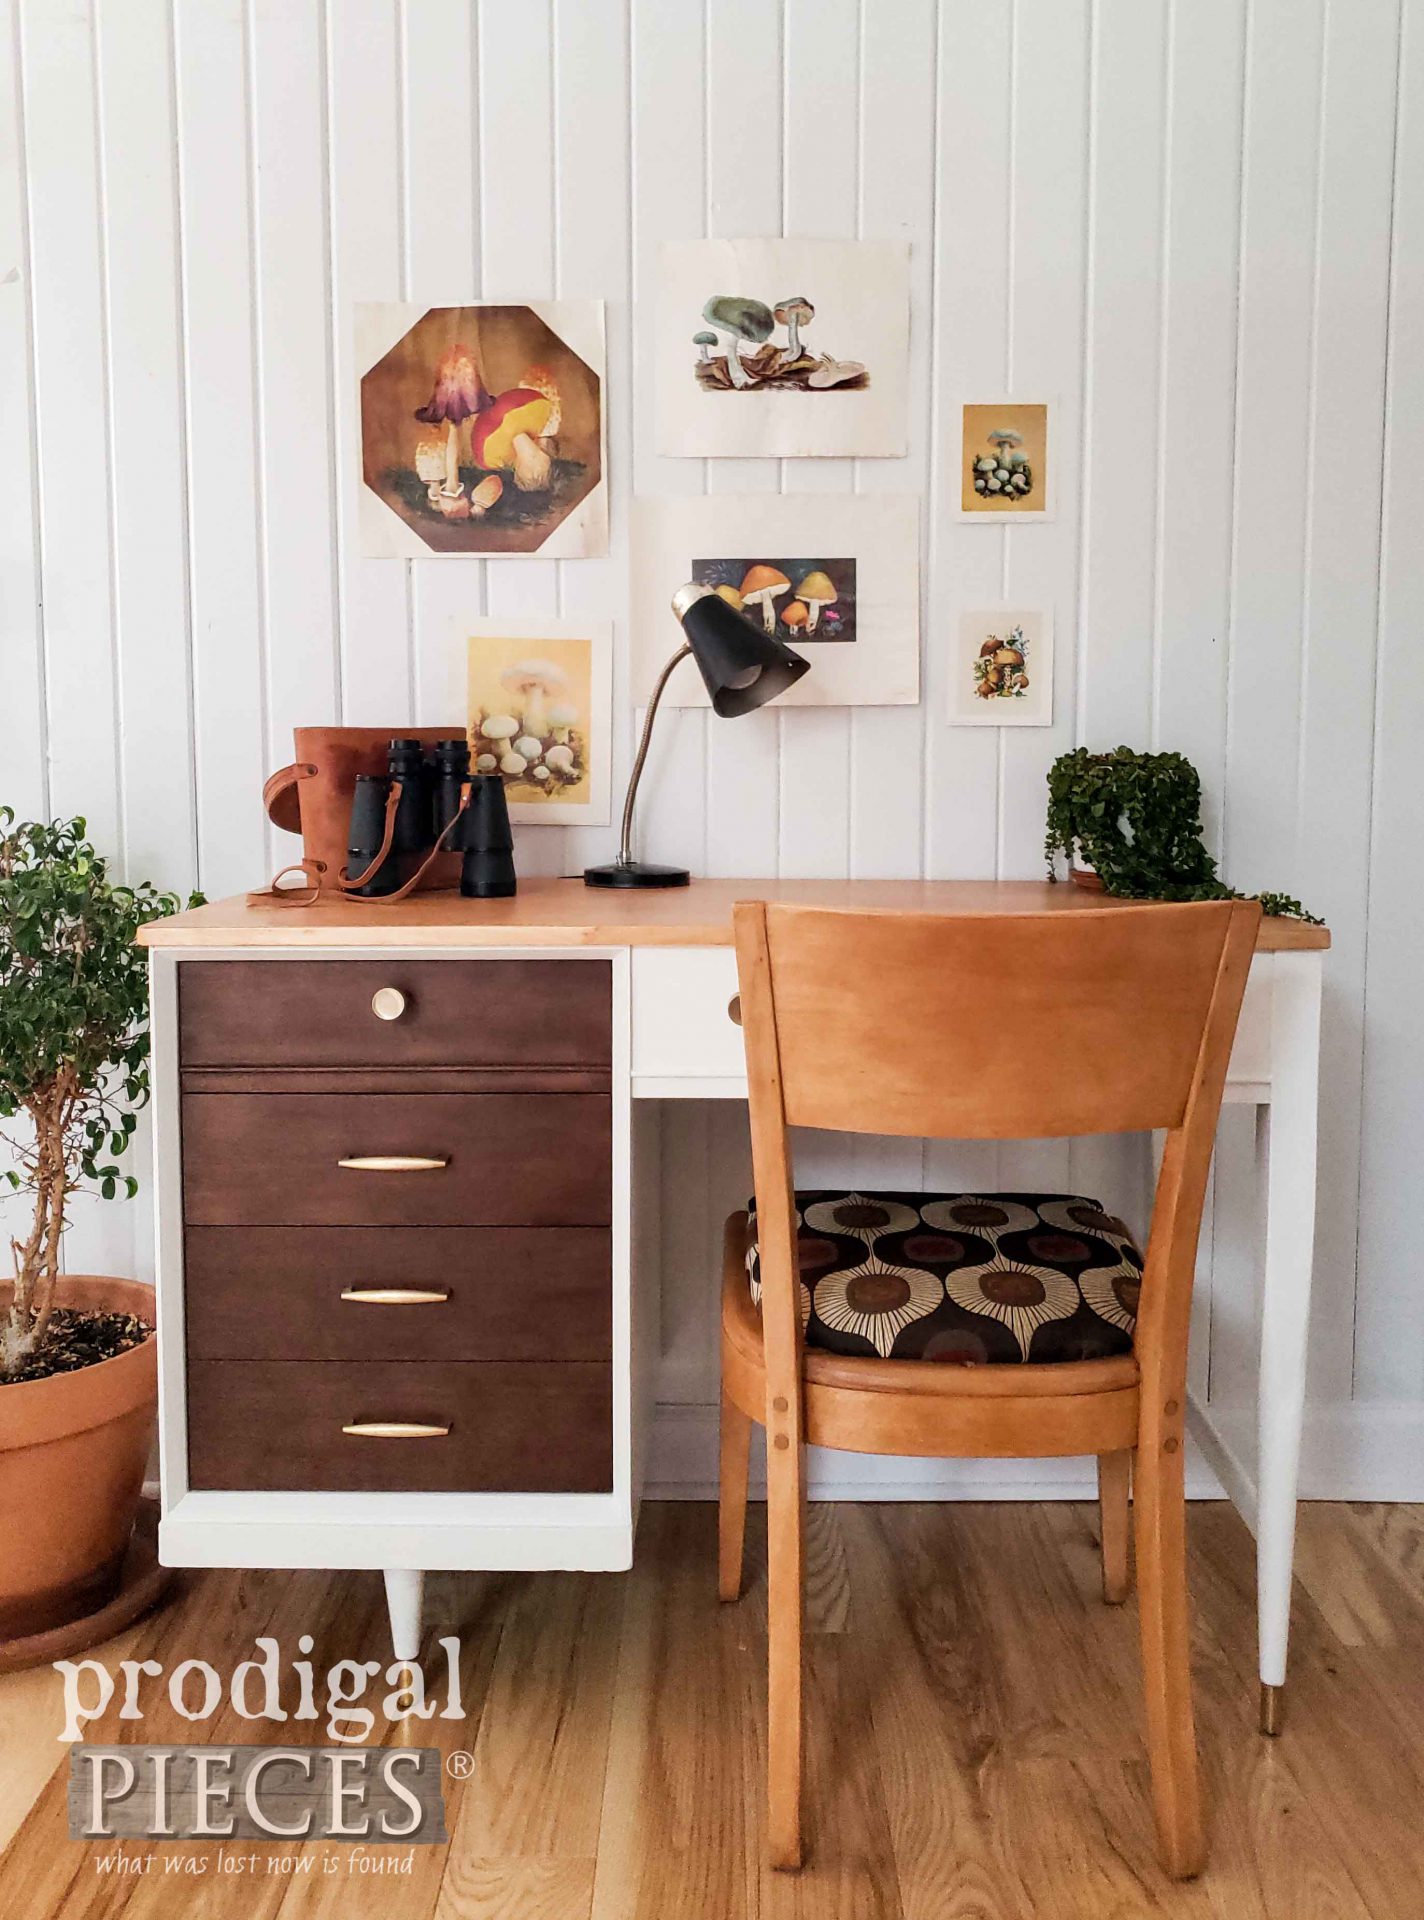 Mid Century Modern Desk made from Upcycled Sewing Desk by Larissa of Prodigal Pieces | prodigalpieces.com #prodigalpieces #diy #home #furniture #midcentury #modern #homedecor #vintage